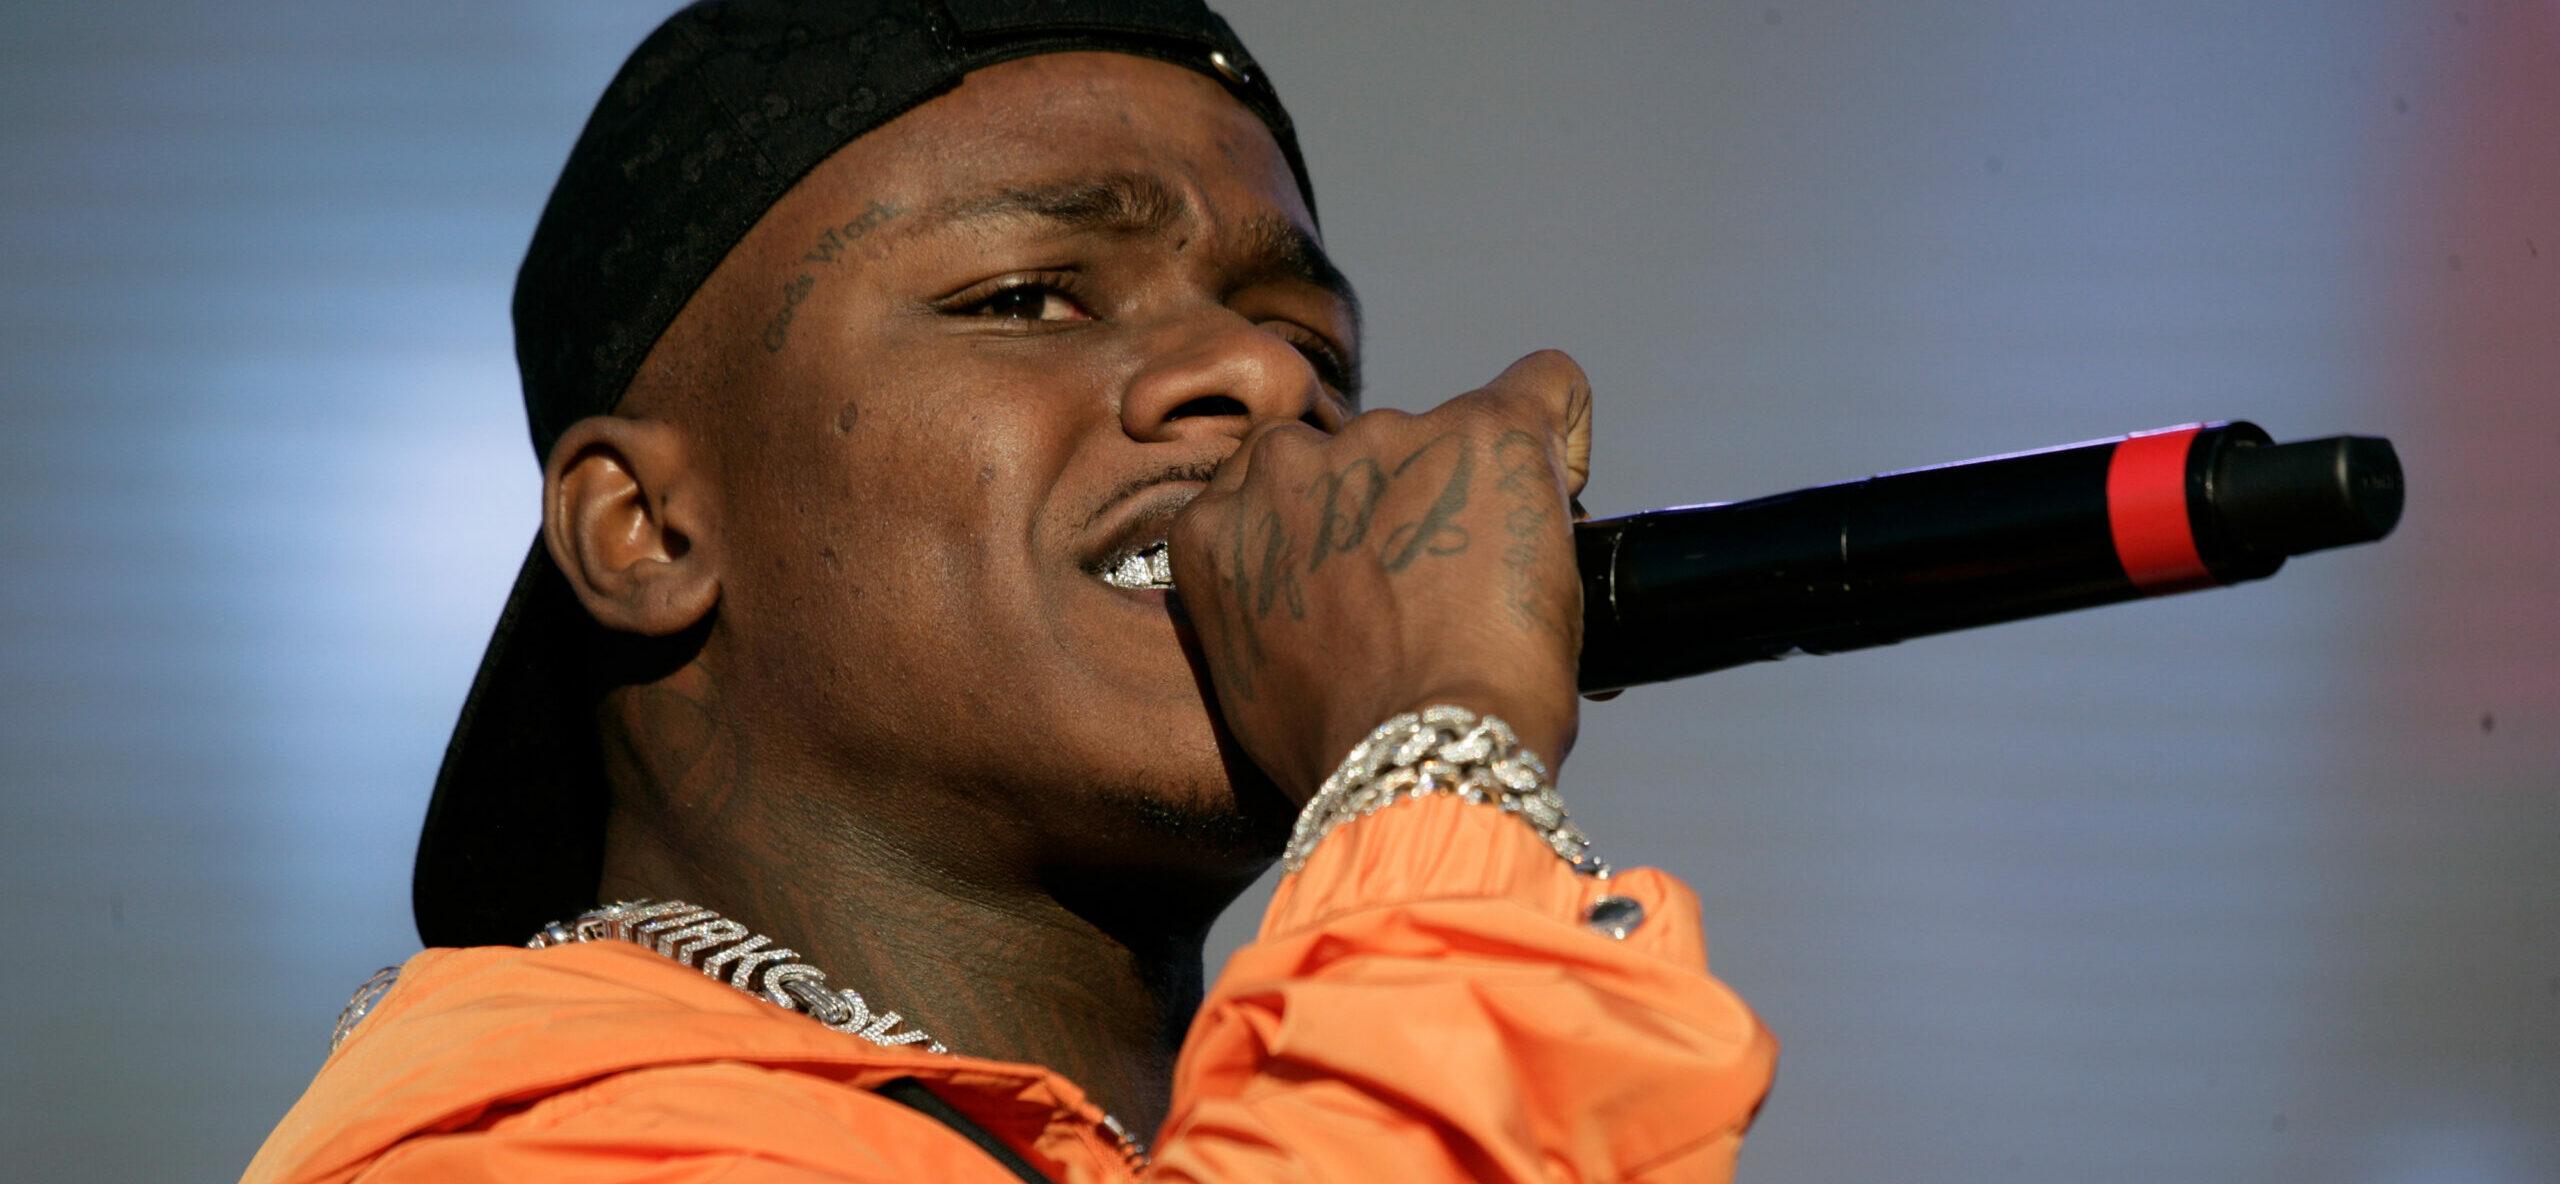 DaBaby Receives Invitation From 11 HIV/AIDS Organizations To Educate Him